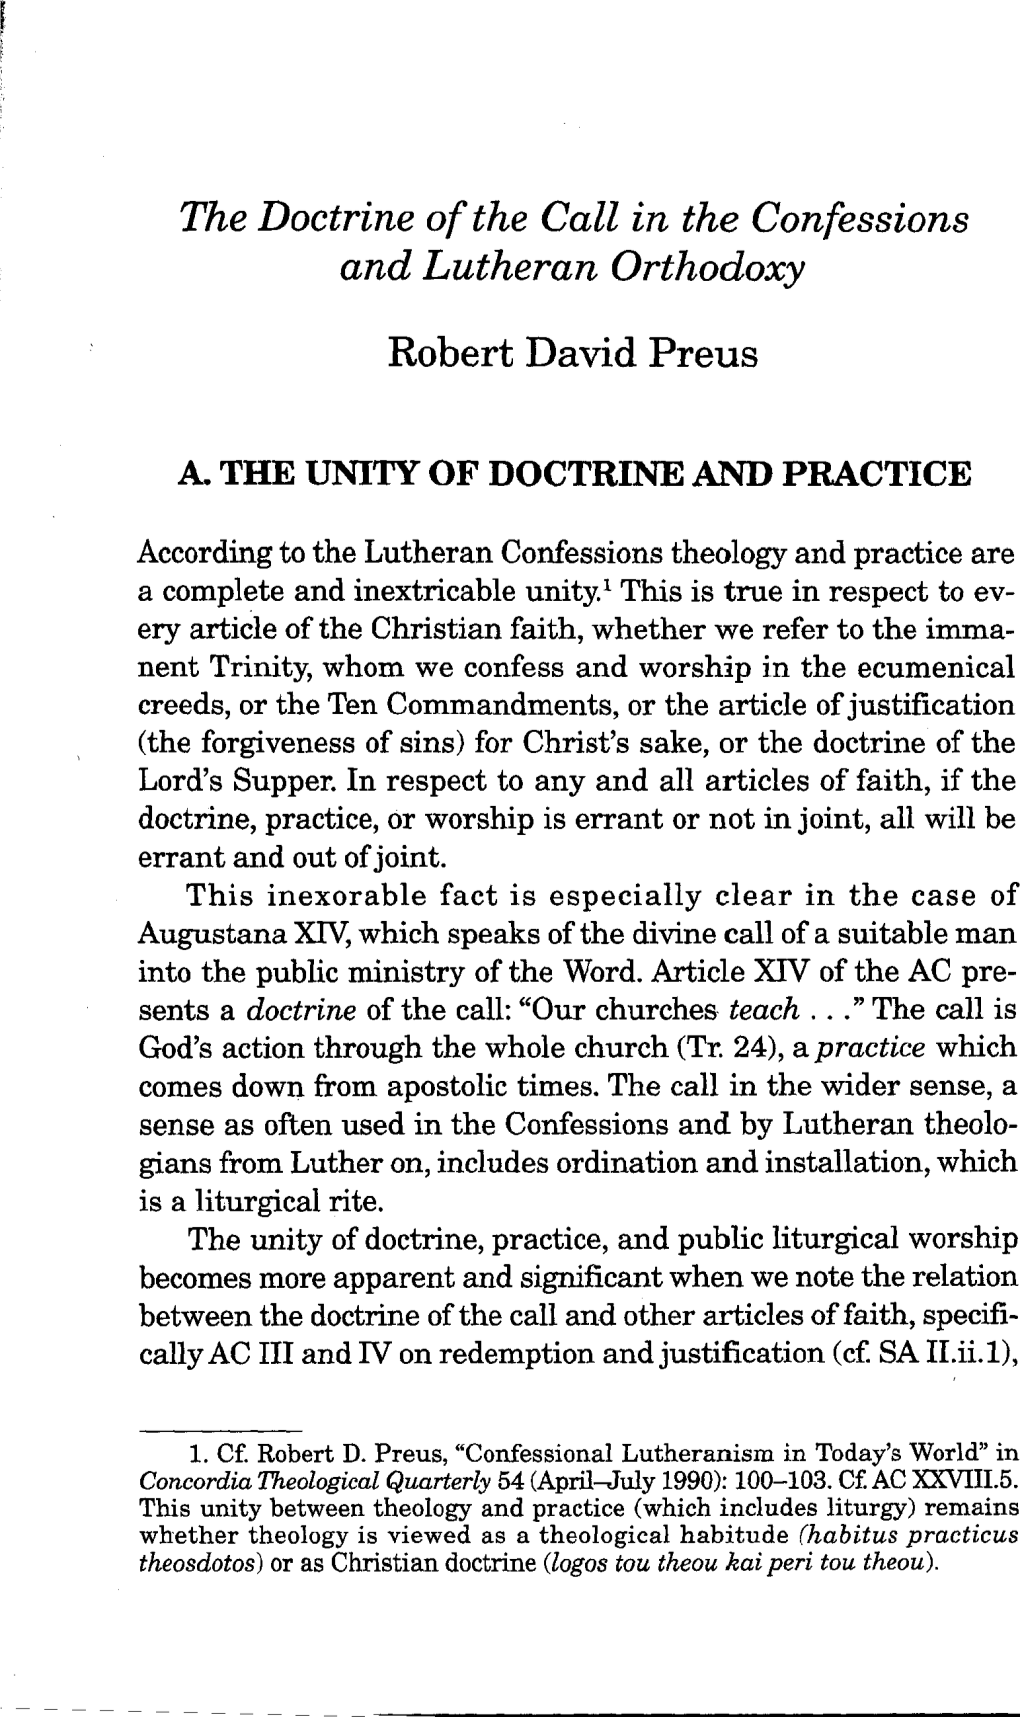 The Doctrine of the Call in the Confessions and Lutheran Orthodoxy Robert David Preus